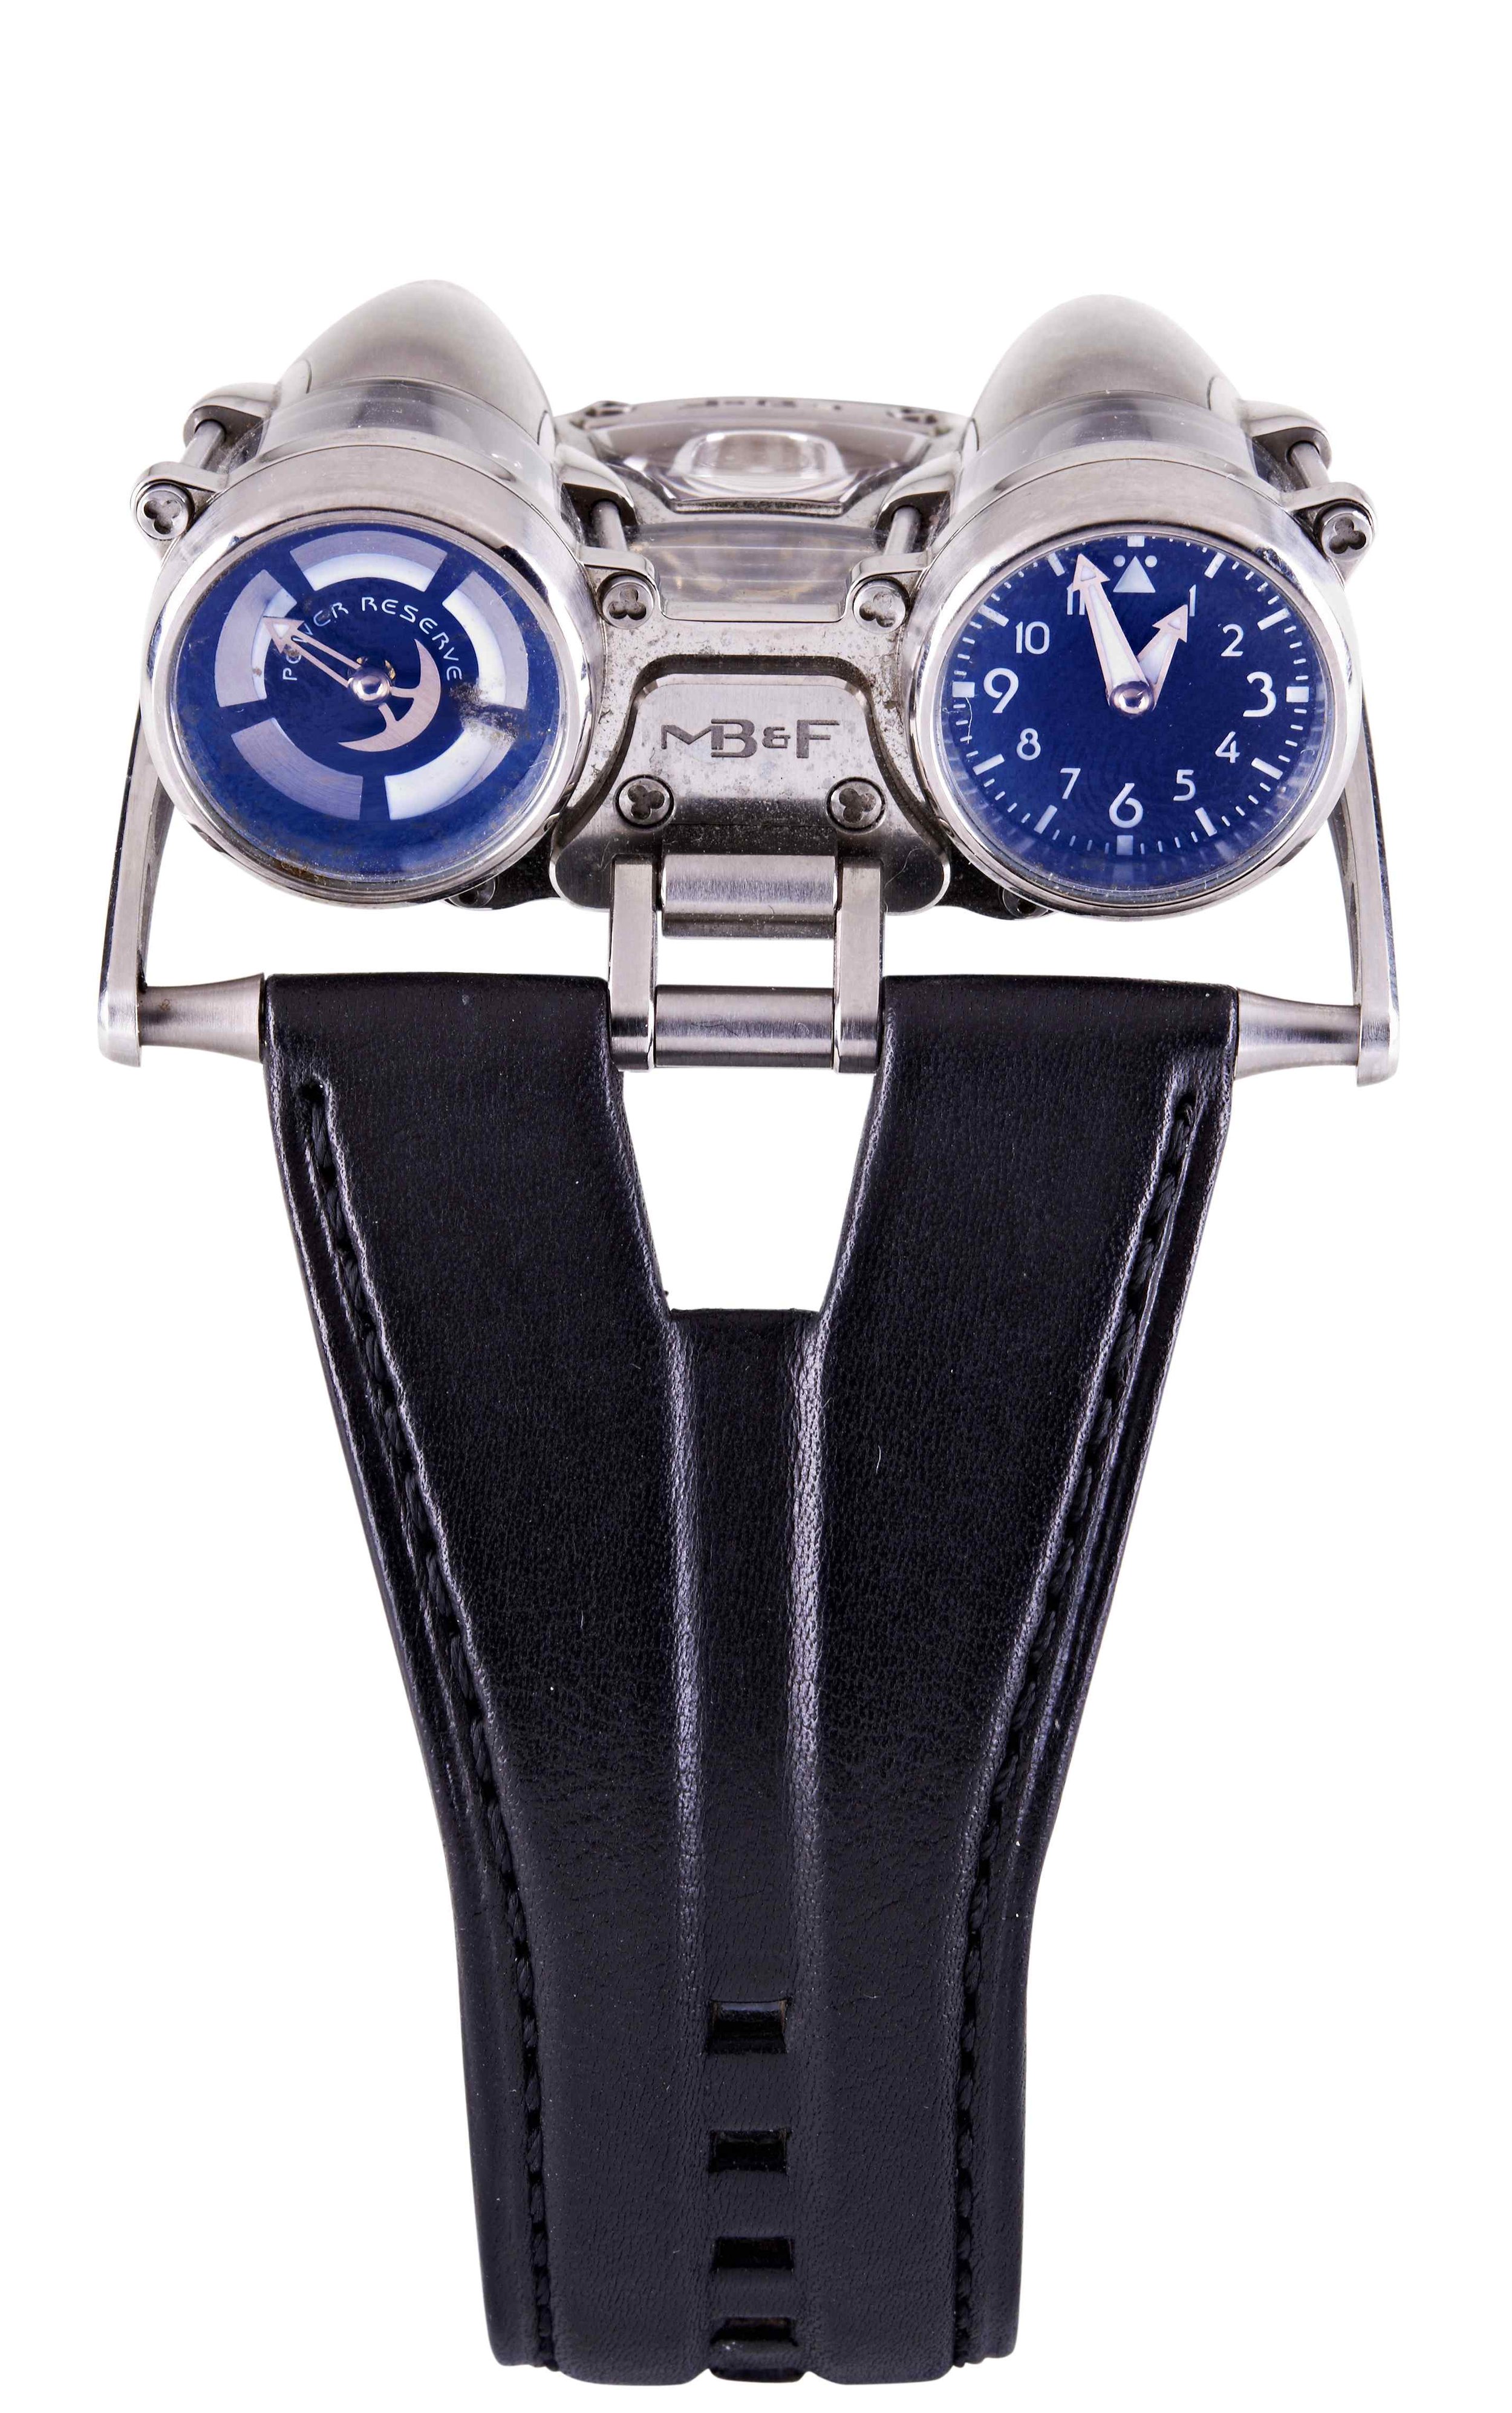 20231129-fine-watches-MB&R-thunderbolt-rs.jpg